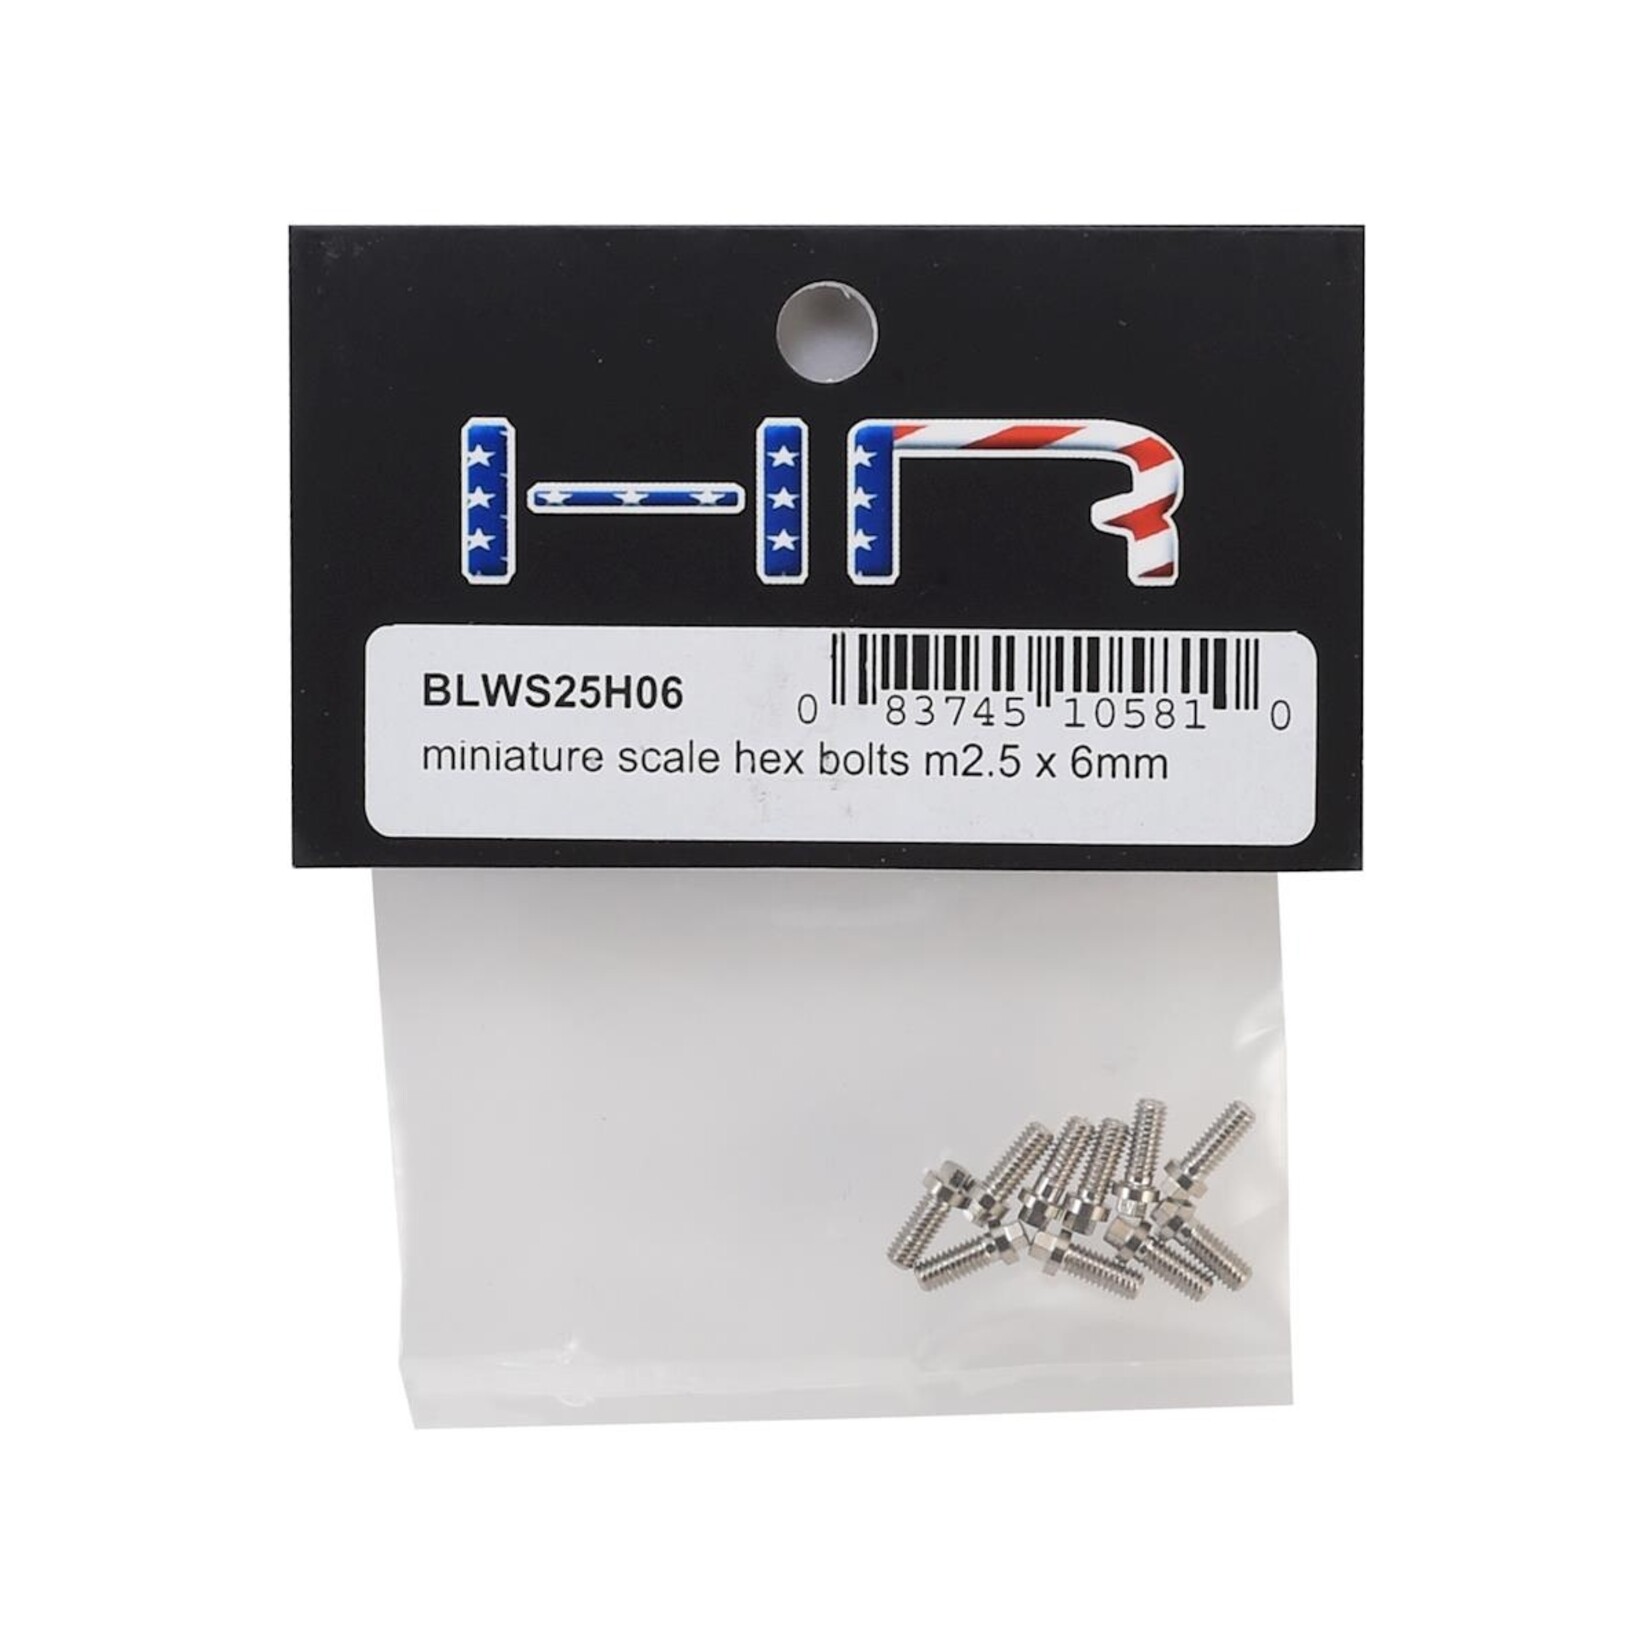 Hot Racing Hot Racing M2.5x6mm Miniature Scale Hex Bolts (10) #BLWS25H06